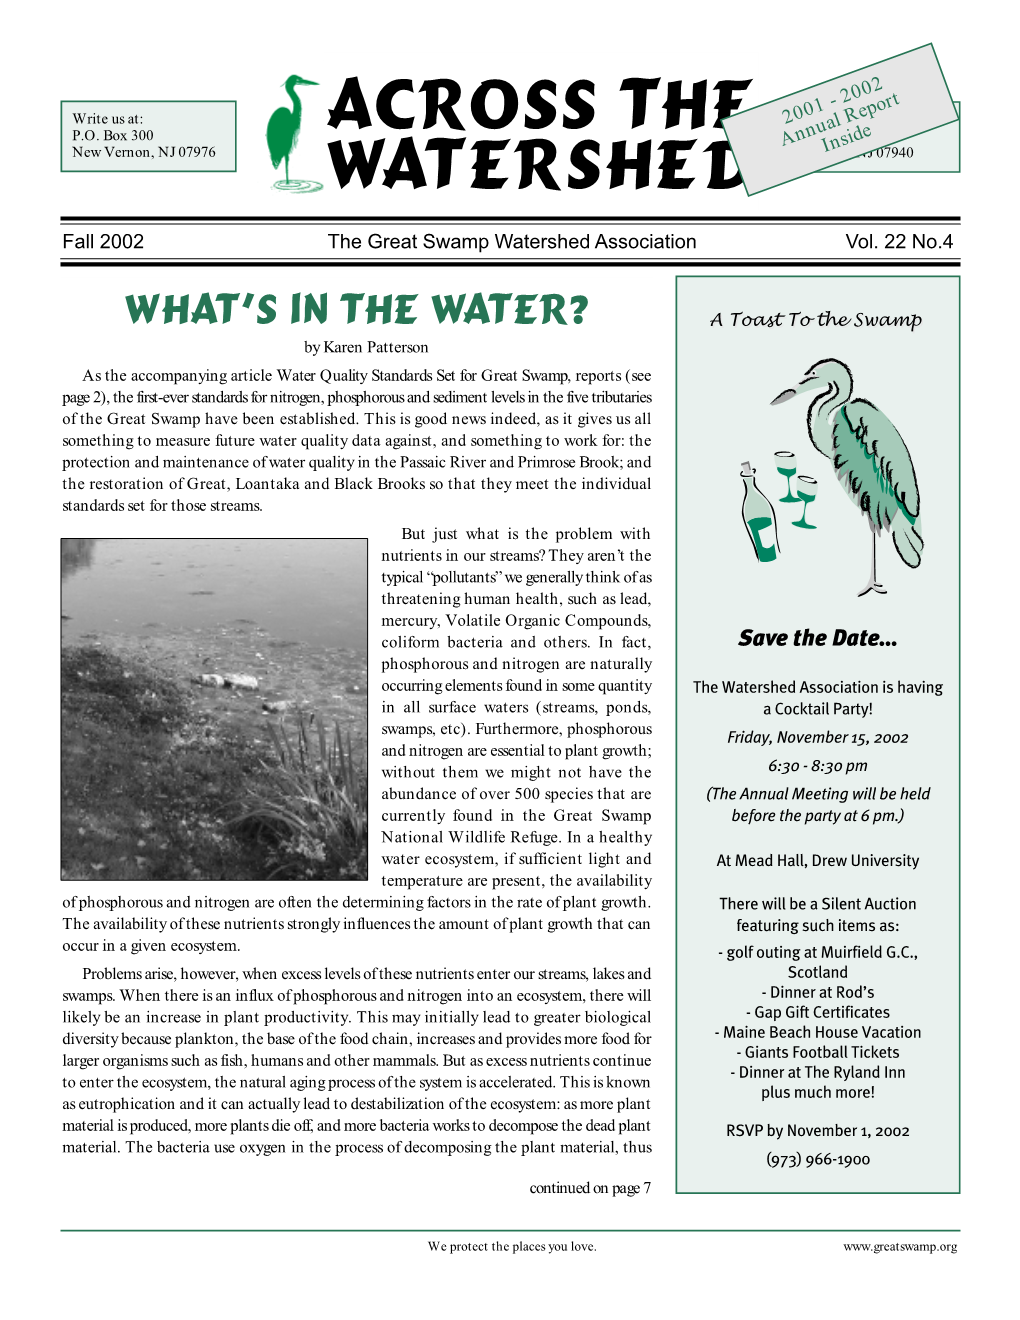 Across the Watershed Is a Quarterly Publication of the Great Swamp Watershed Association